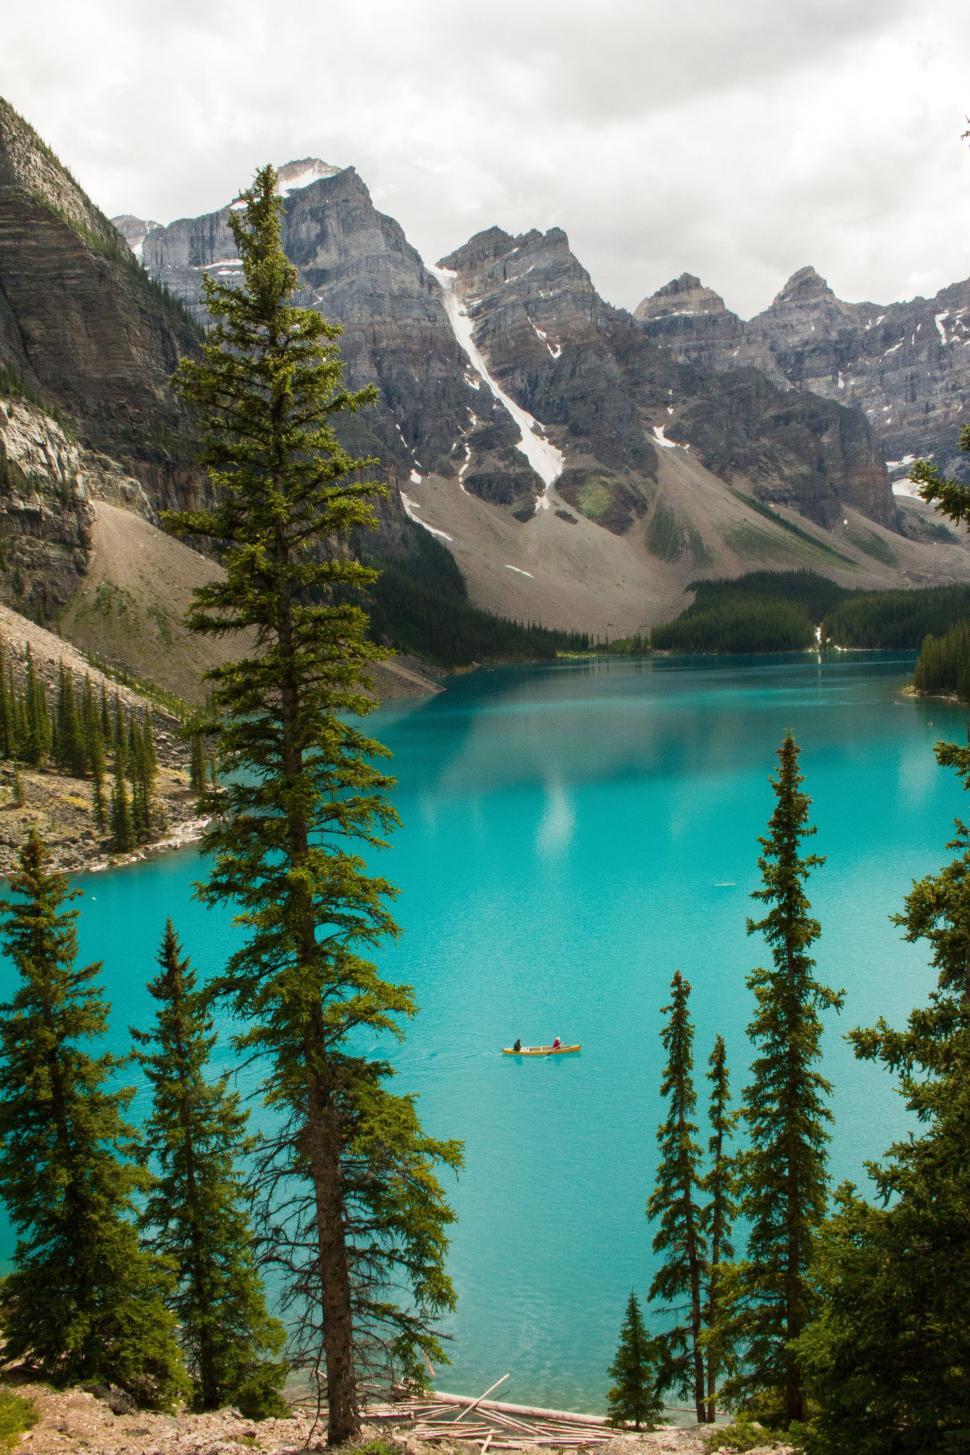 Free Image of Blue Lake Surrounded by Mountains and Trees 